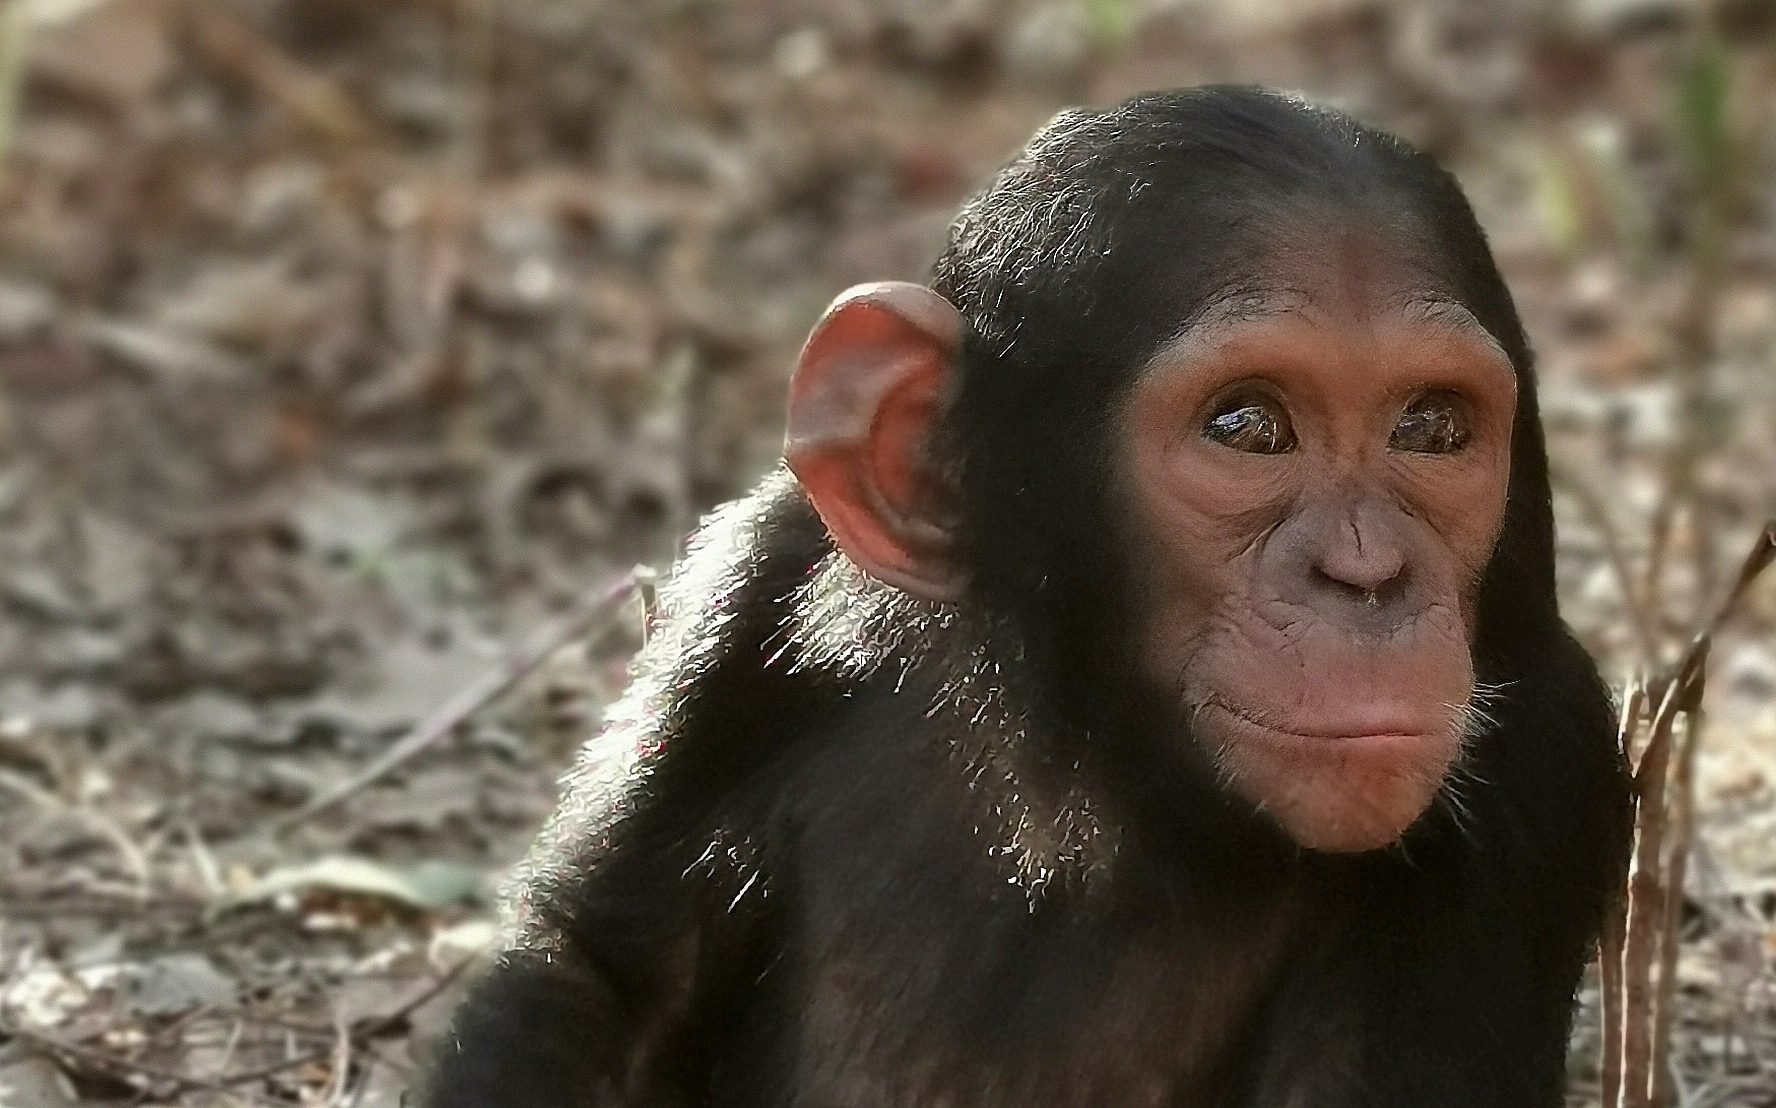 necklaces to save chimpanzees